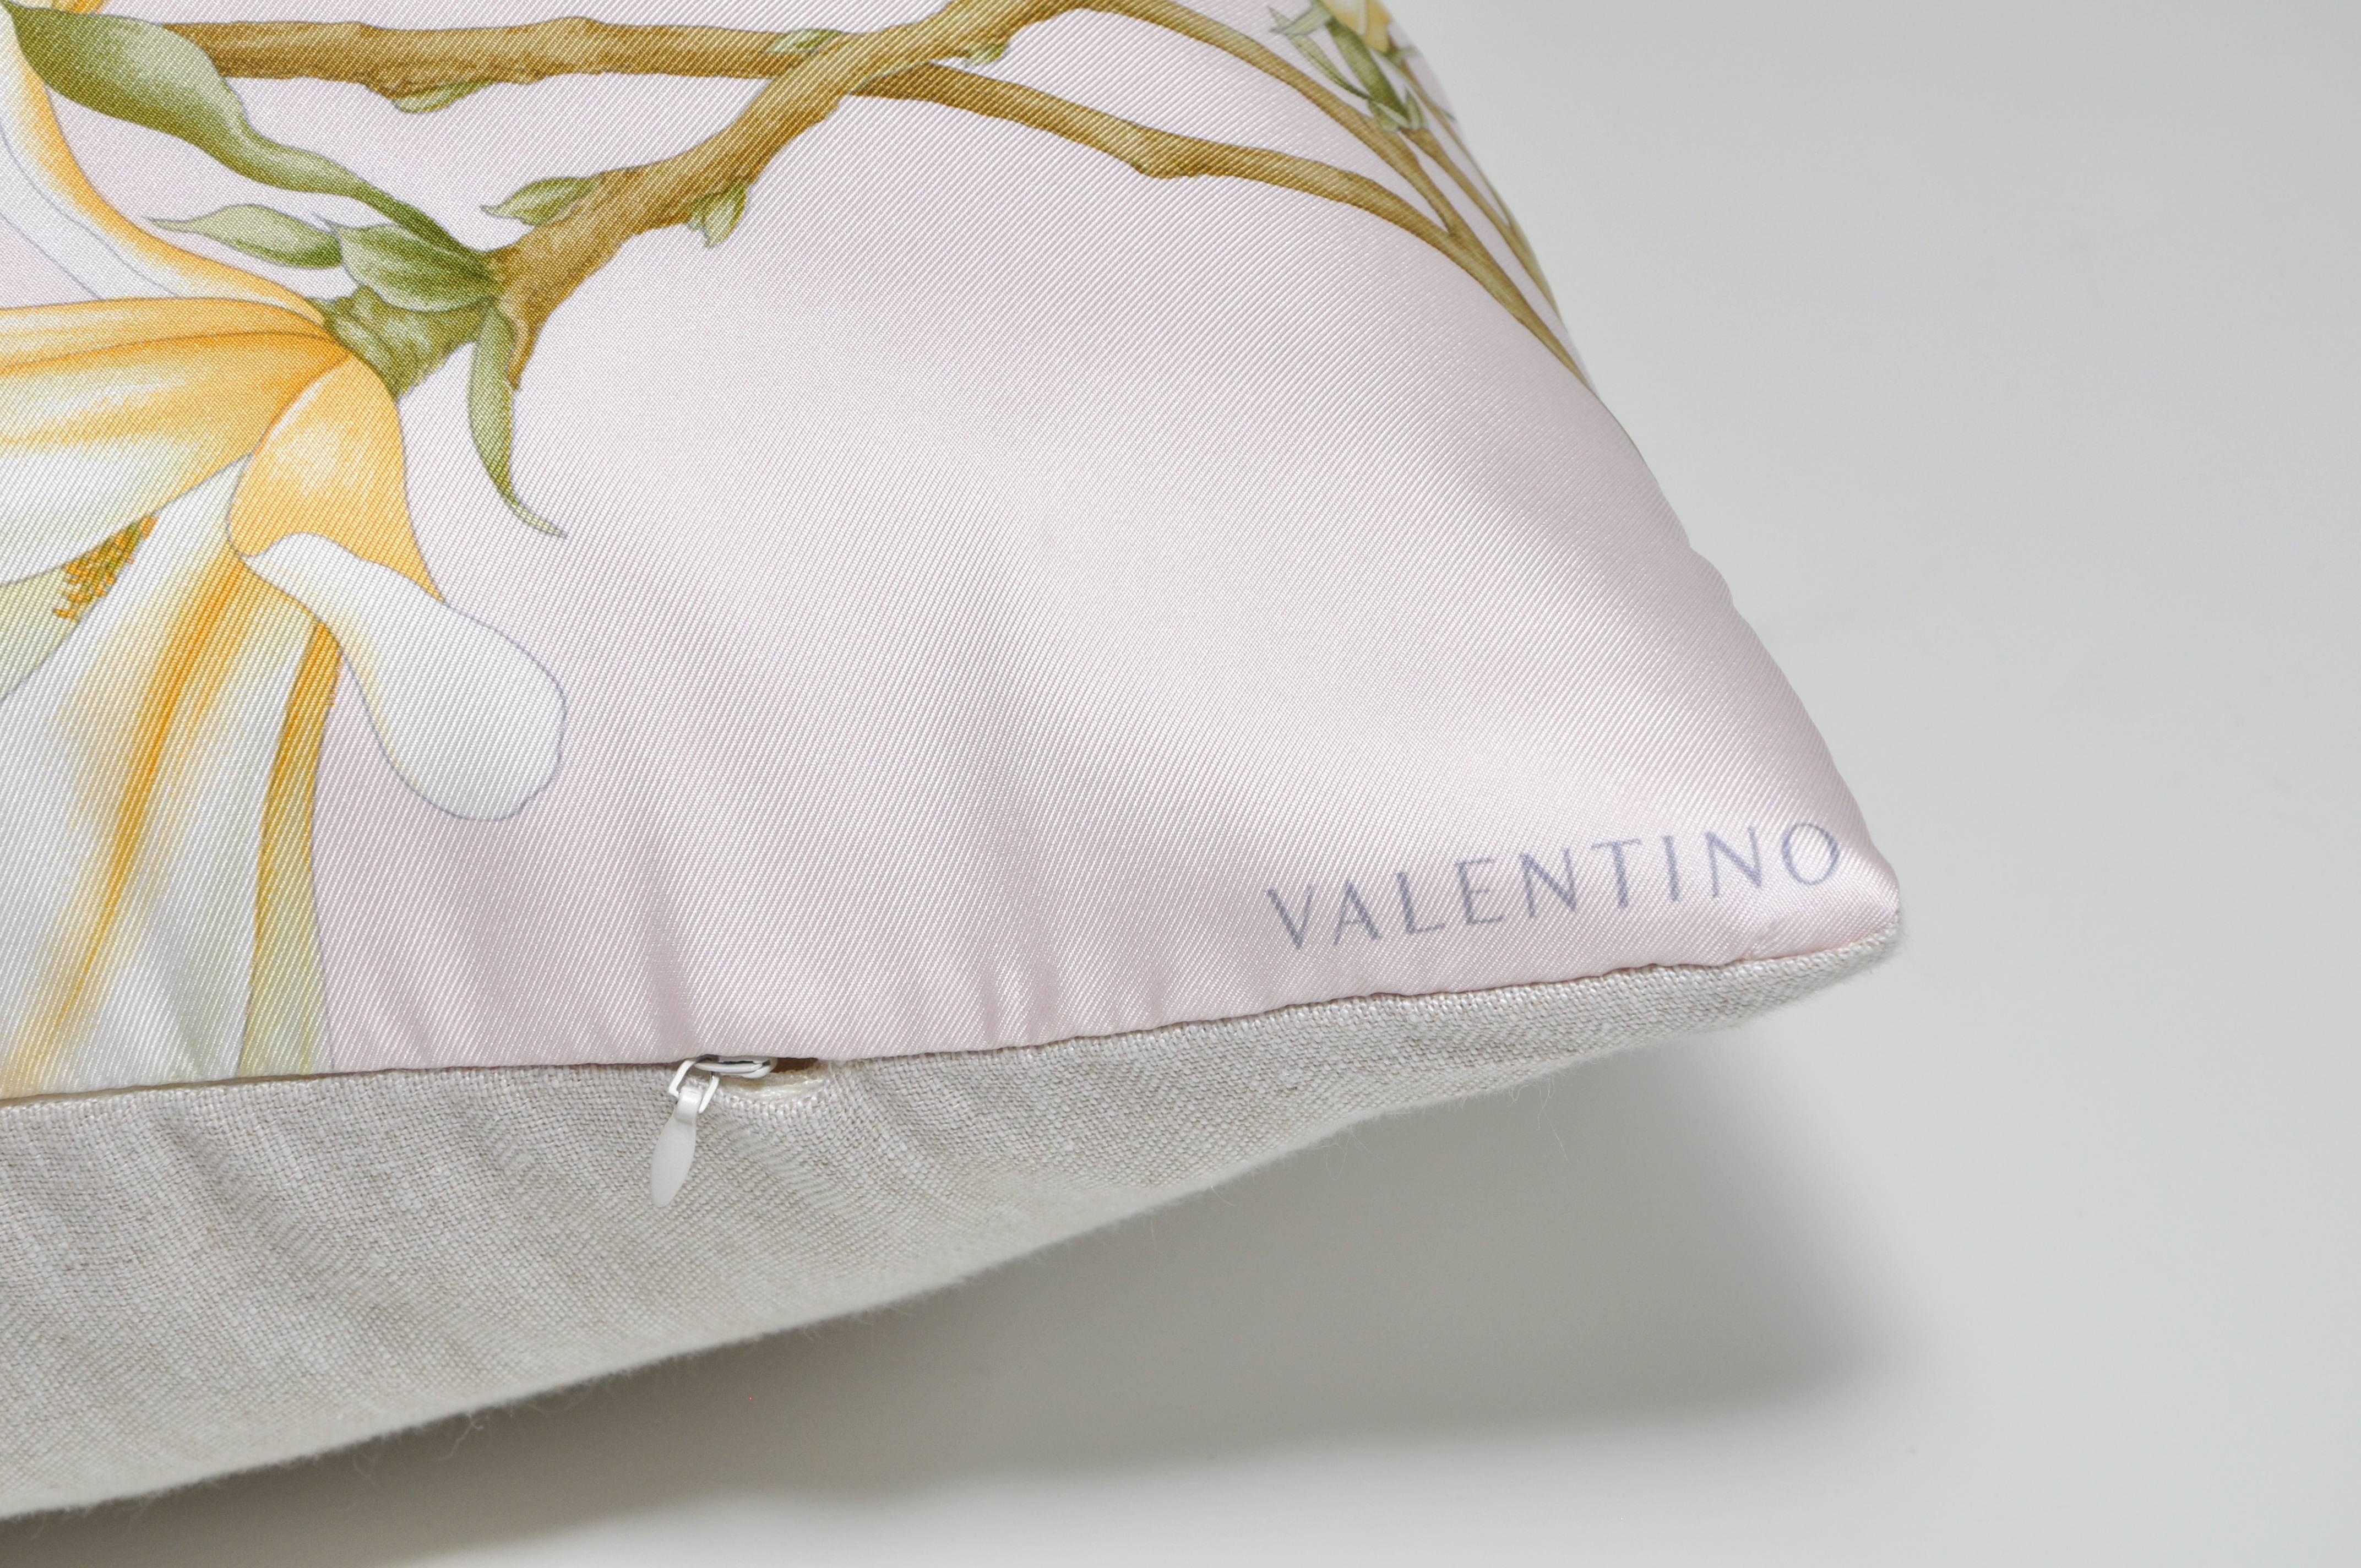 A large custom made one-of-a-kind cushion (pillow) created from a stunning rare vintage Valentino silk fashion scarf in an extremely elegant design. In an exquisite soft ballet pale pink covered in luscious magnolia flowers in full bloom. Like a